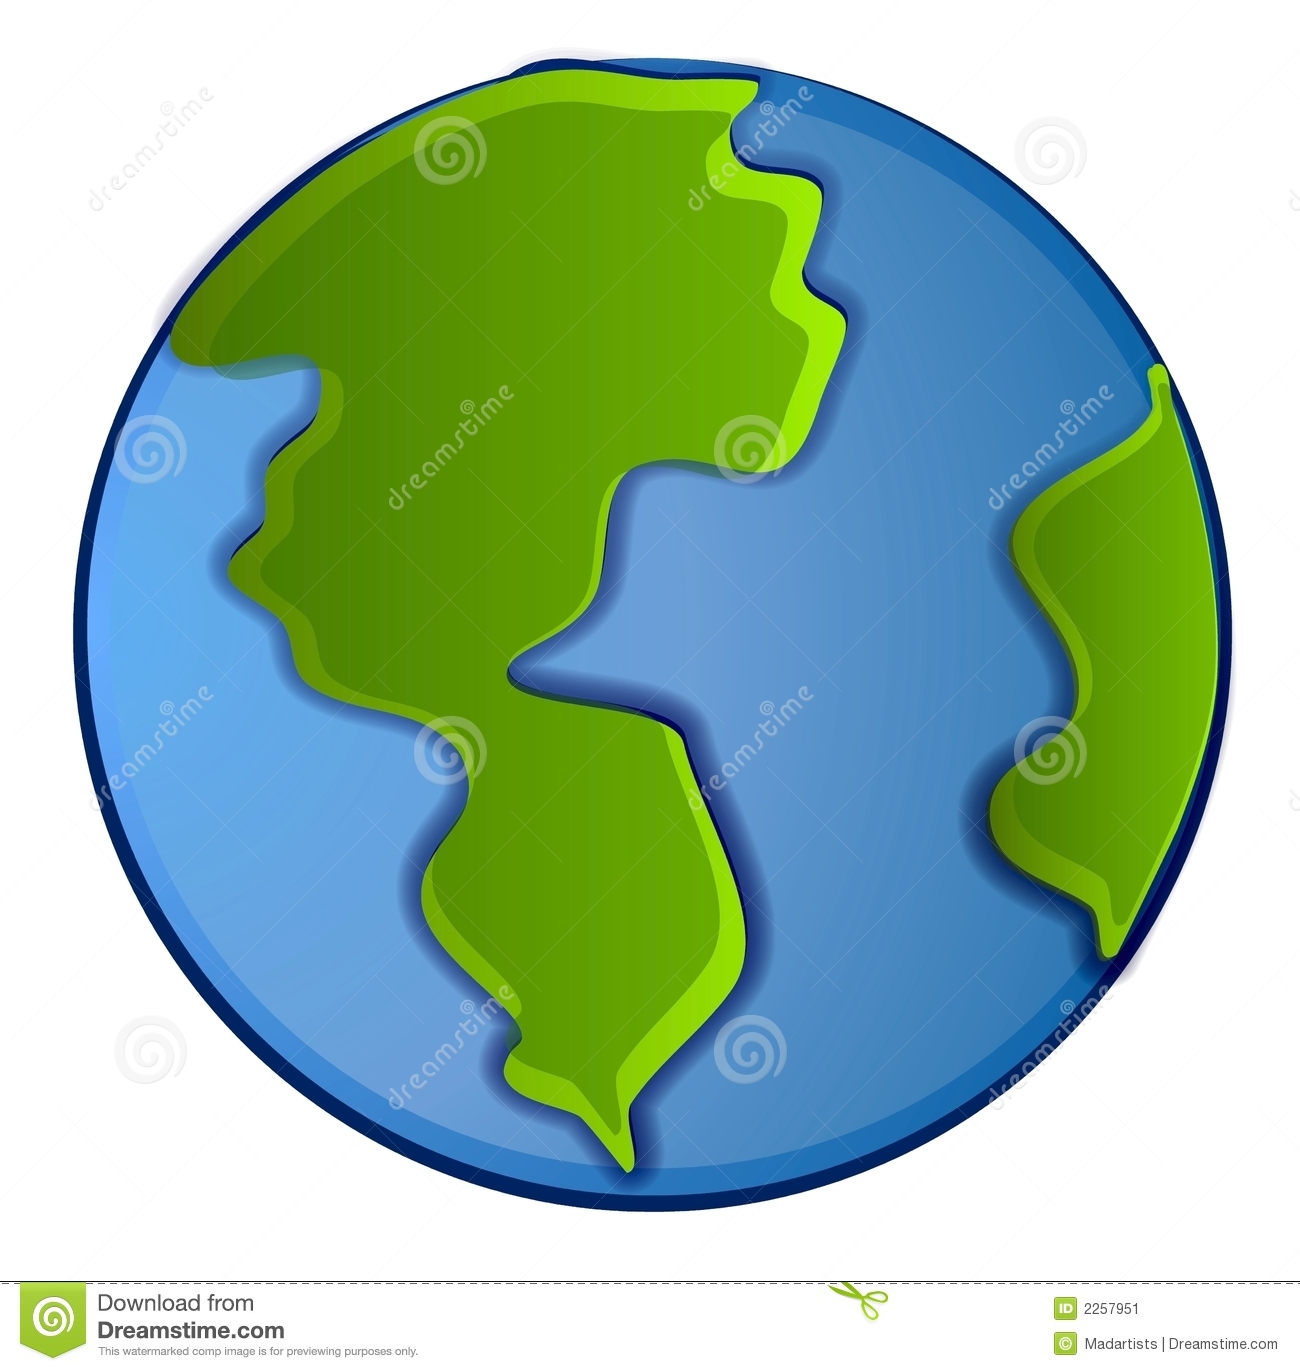 Planet Earth Clipart.